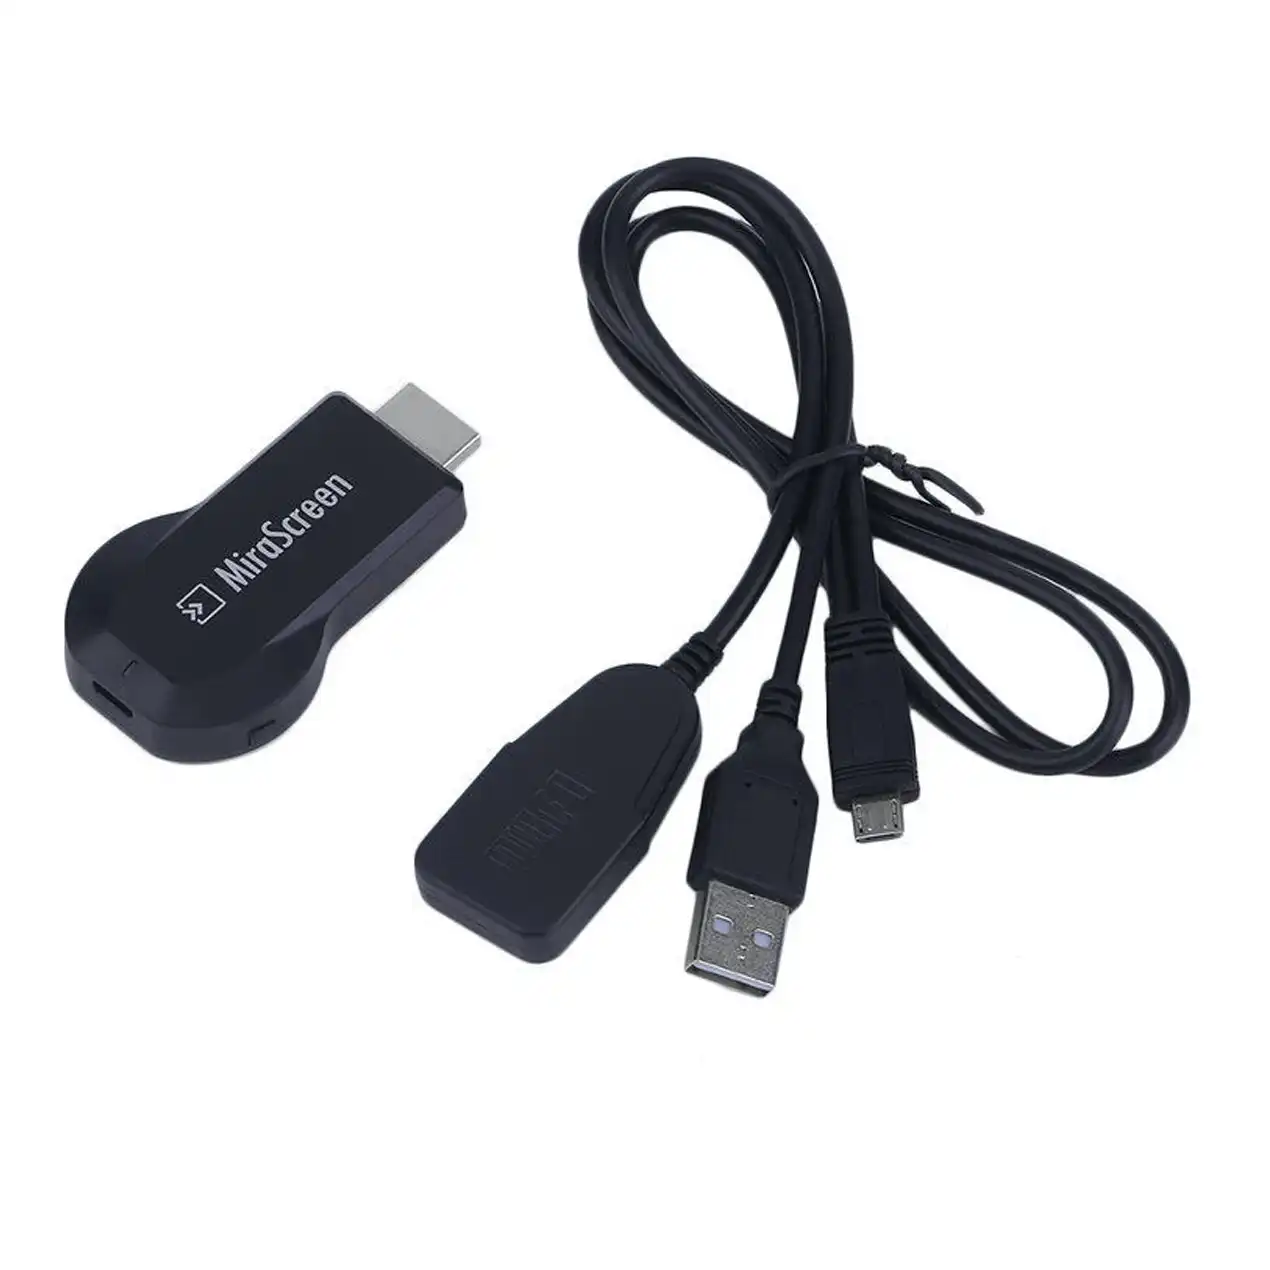 Mirascreen Dlna Wifi Miracast Airplay Dongle Display Mini Android Tv Stream Hd